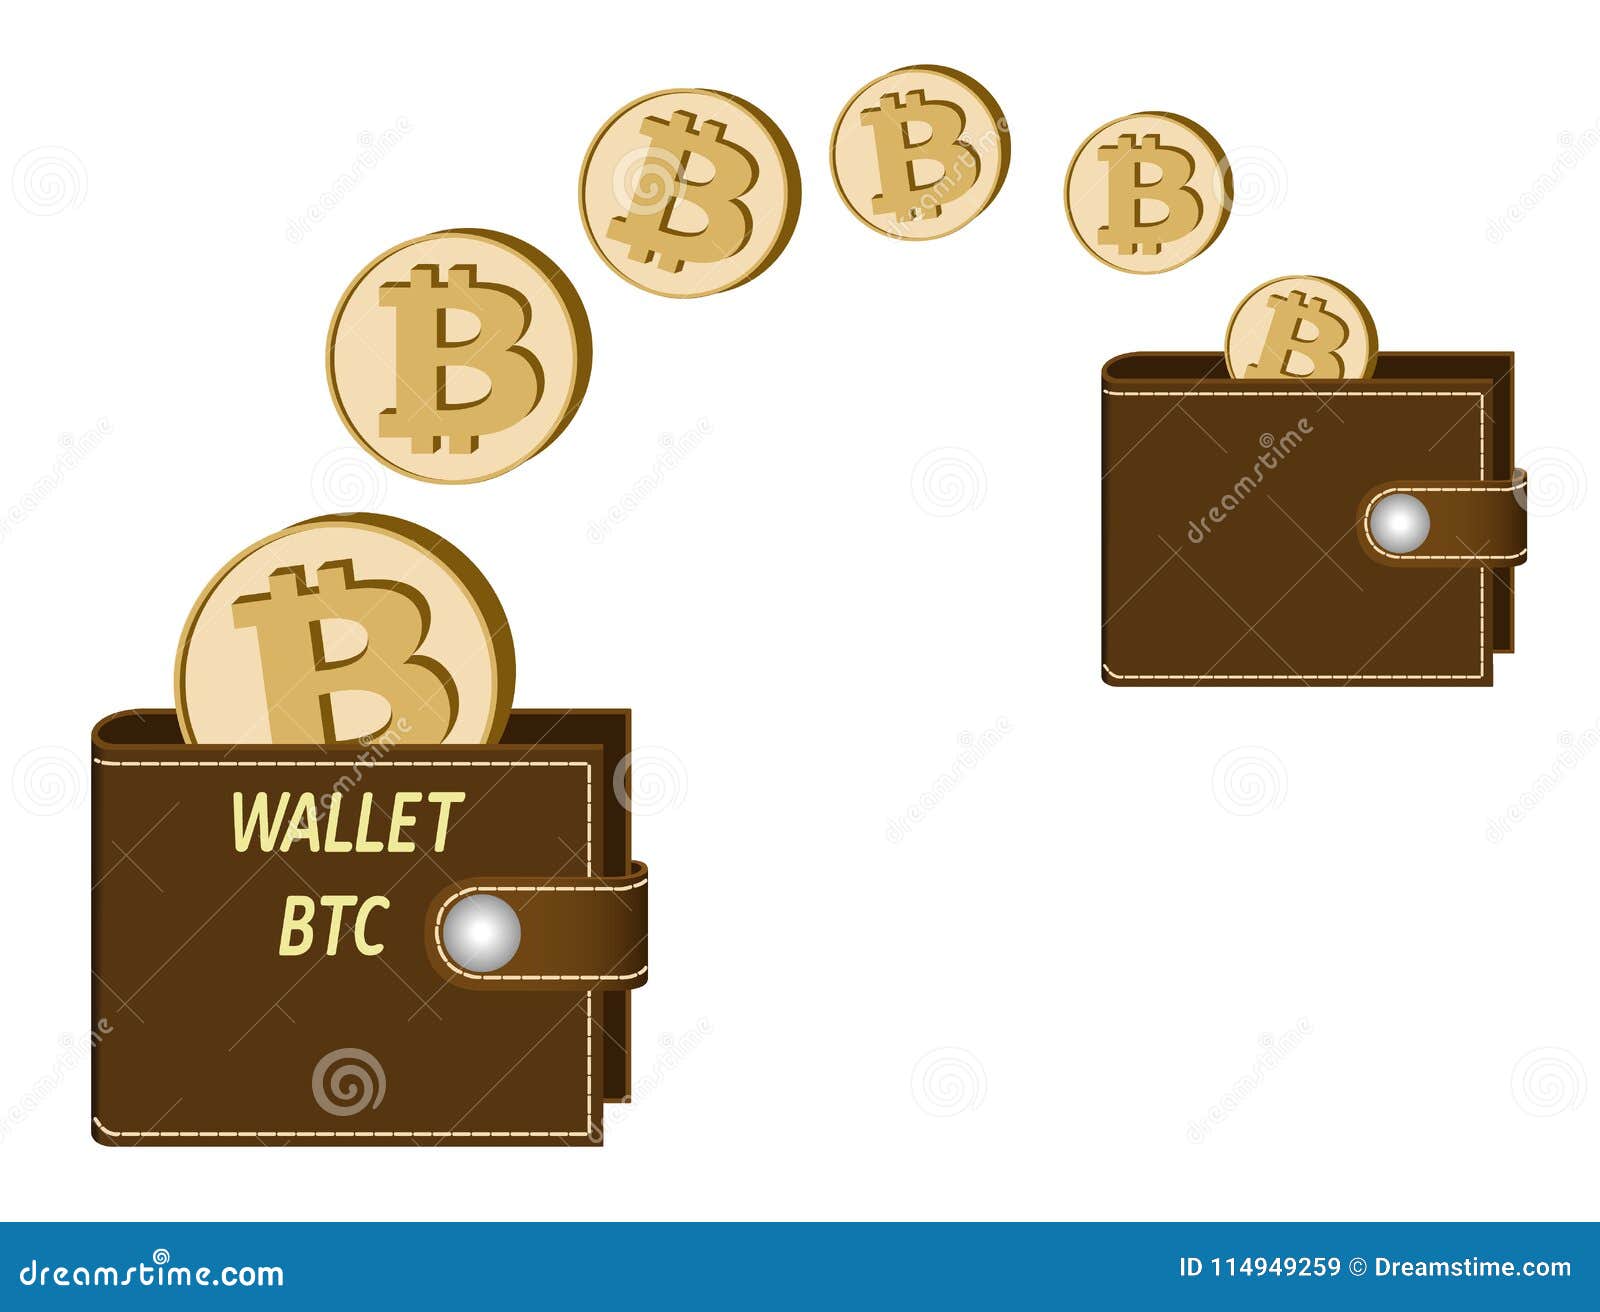 can i transfer my bitcoins from one wallet to another